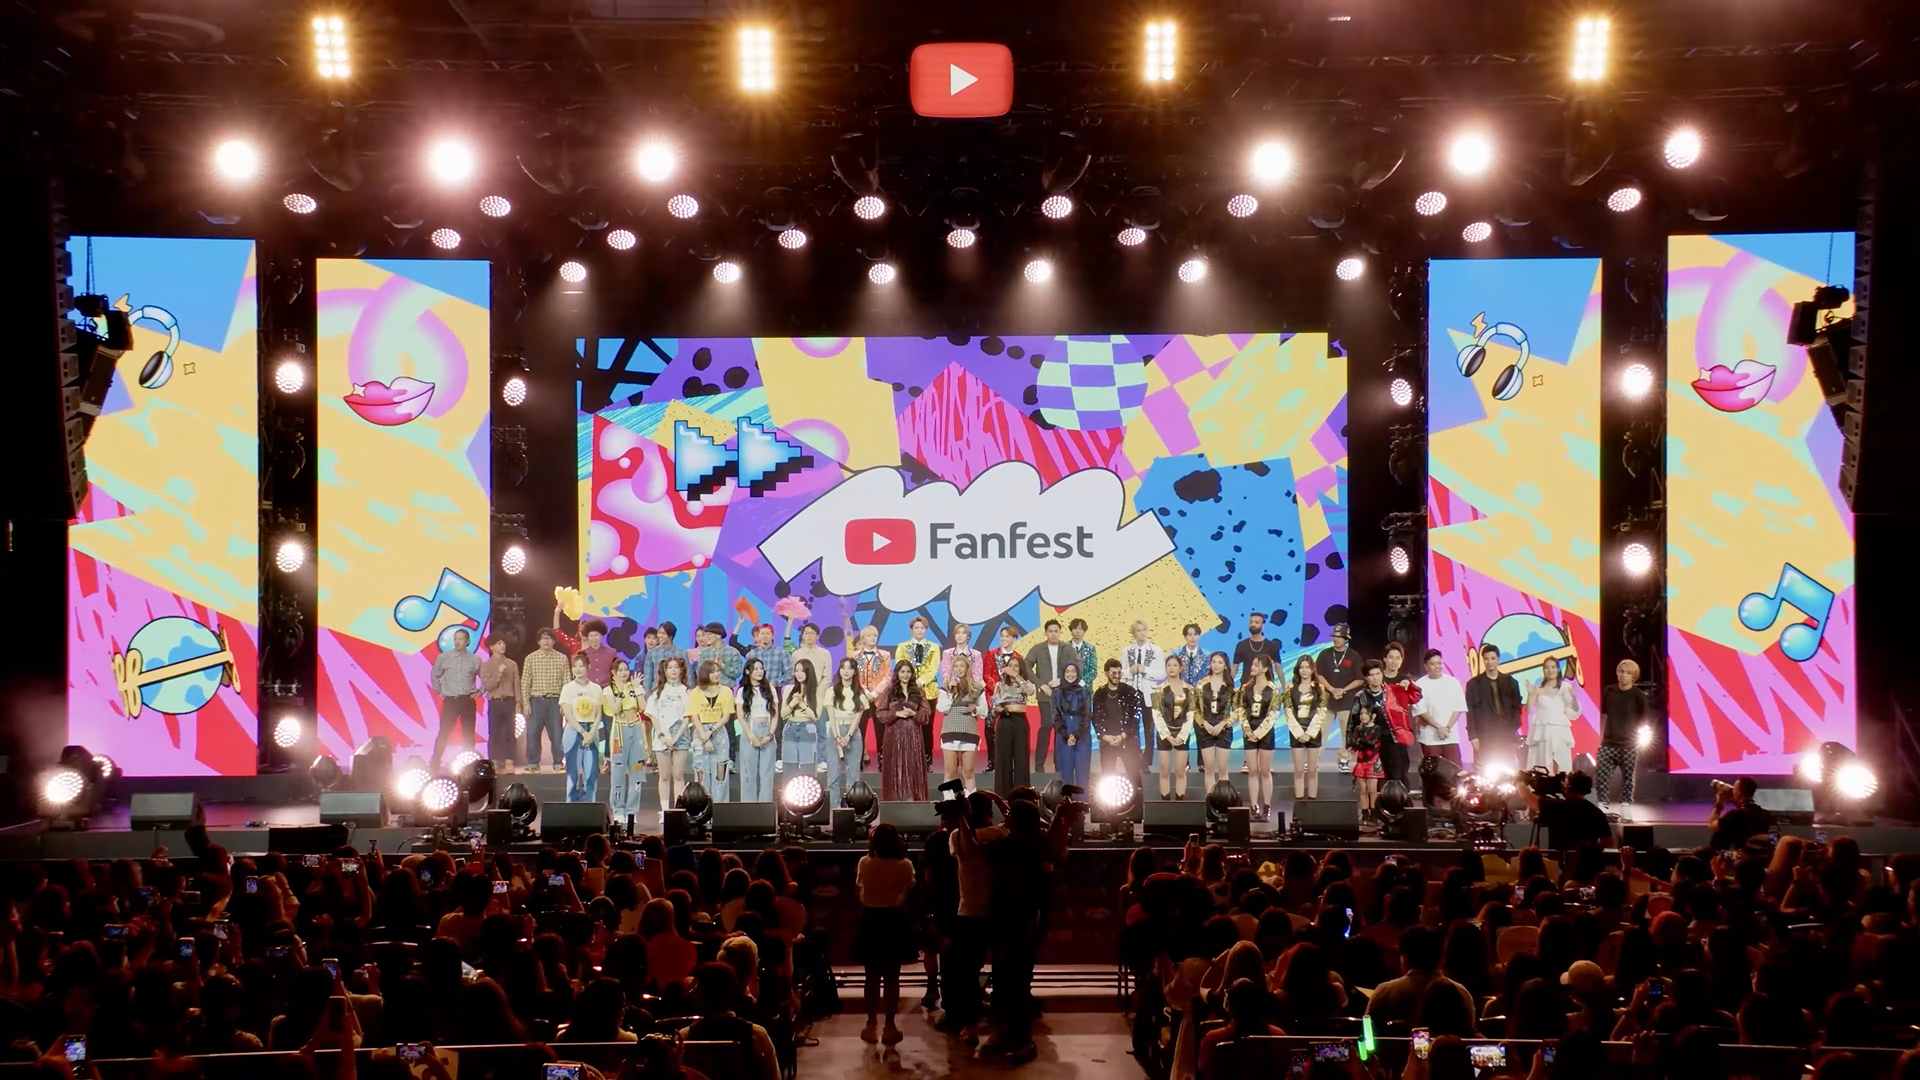 Filipino YouTubers join APAC’s biggest content creators on stage  for YouTube FanFest’s 10th anniversary